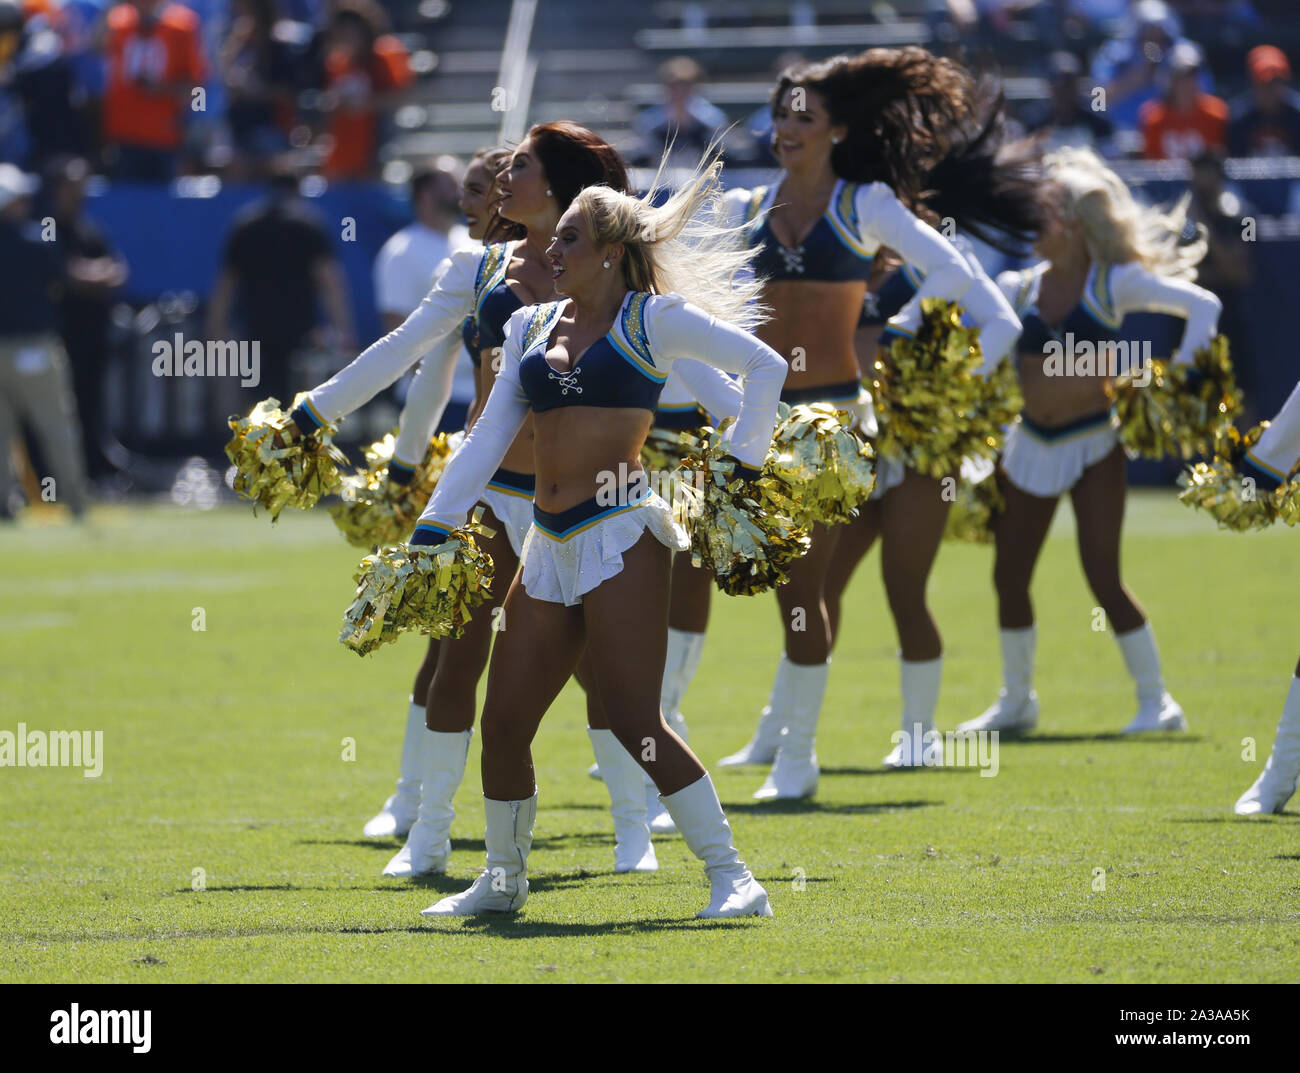 Los Angeles, California, USA. 6th Oct, 2019. Los Angeles Chargers cheerleaders perform during an NFL football game between Los Angeles Chargers and Denver Broncos, Sunday, Oct. 6, 2019, in Carson, Calif. Credit: Ringo Chiu/ZUMA Wire/Alamy Live News Stock Photo